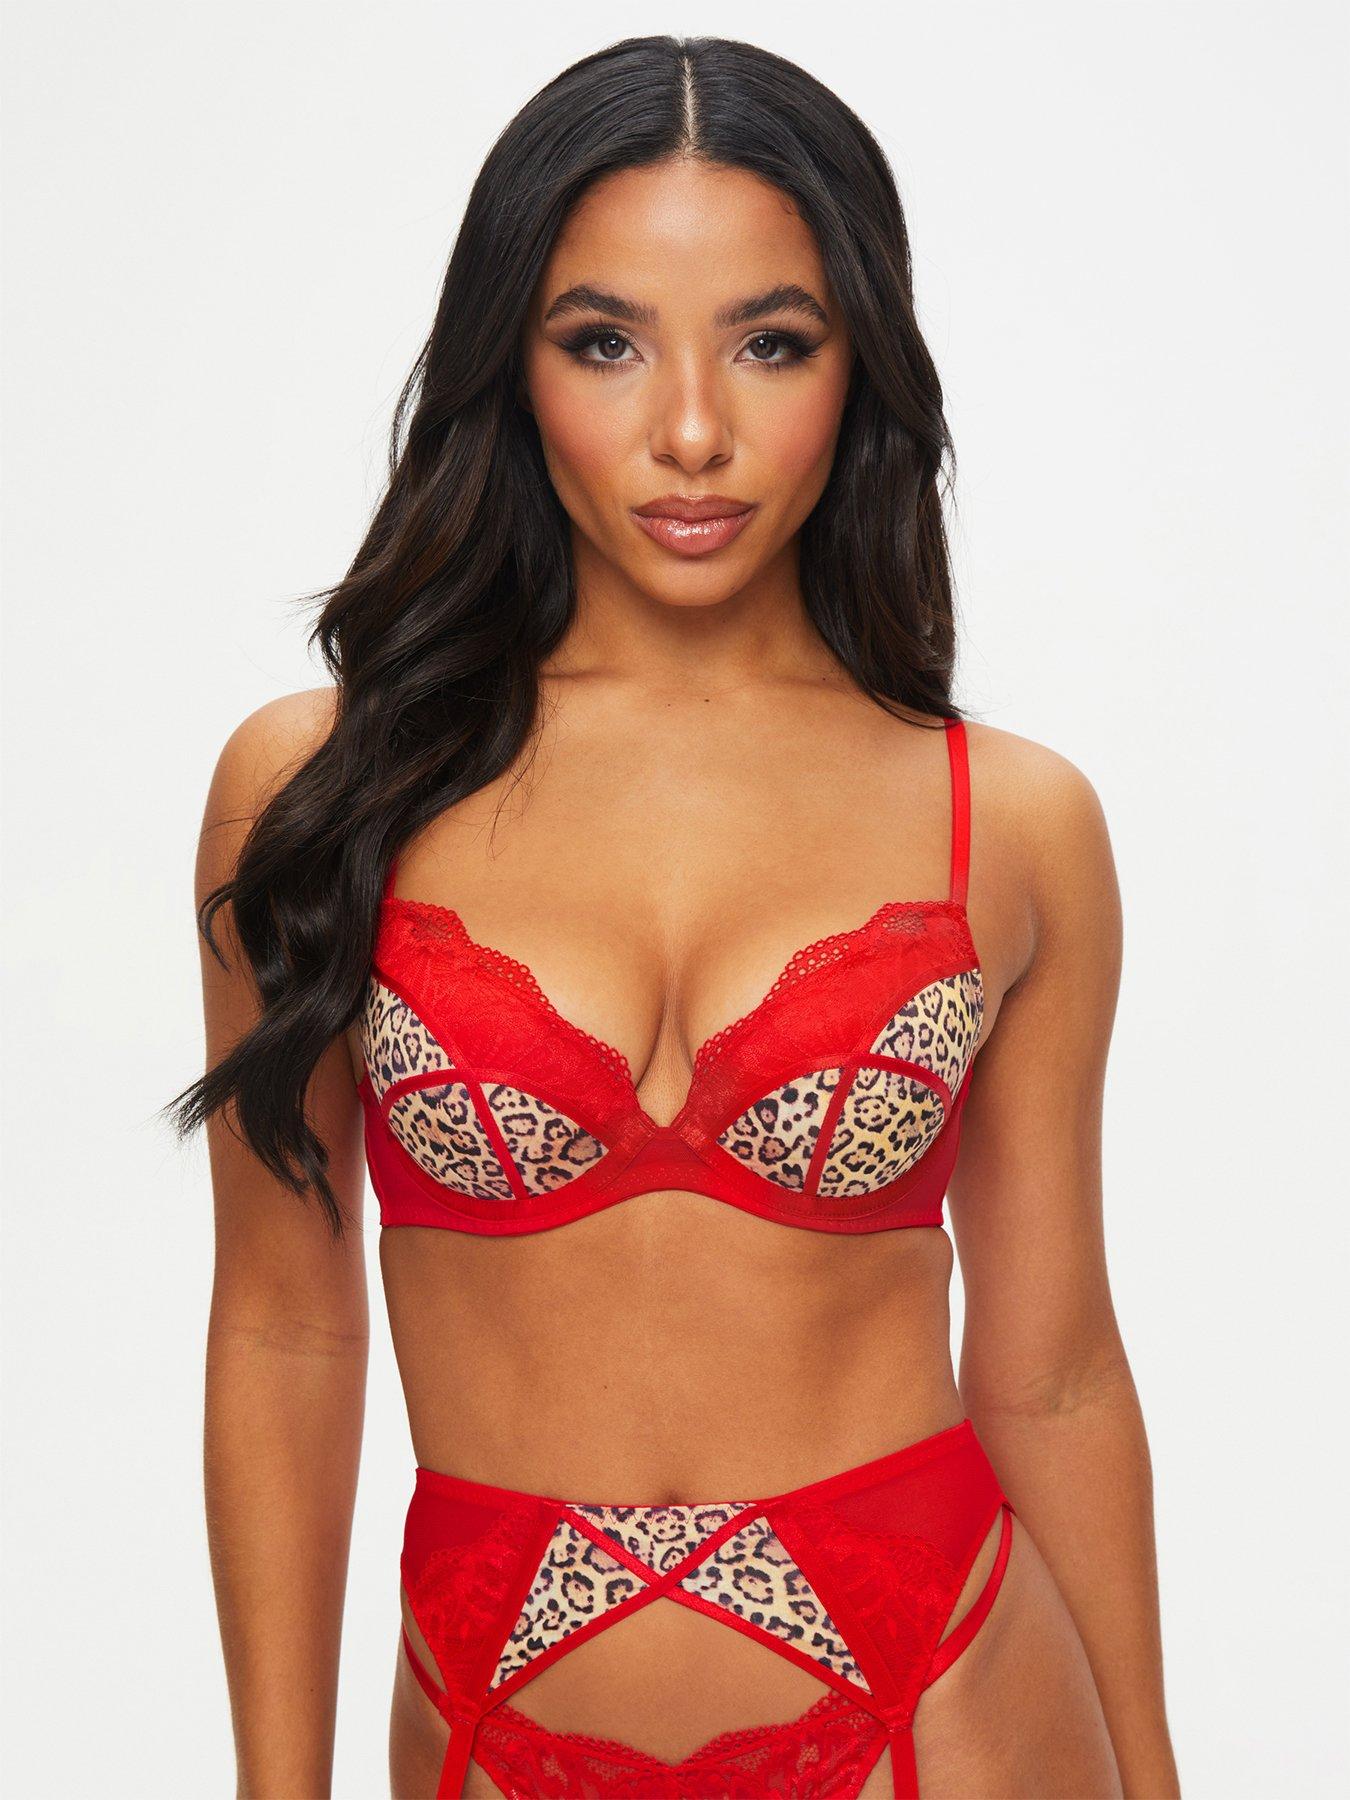 Red, Ann summers